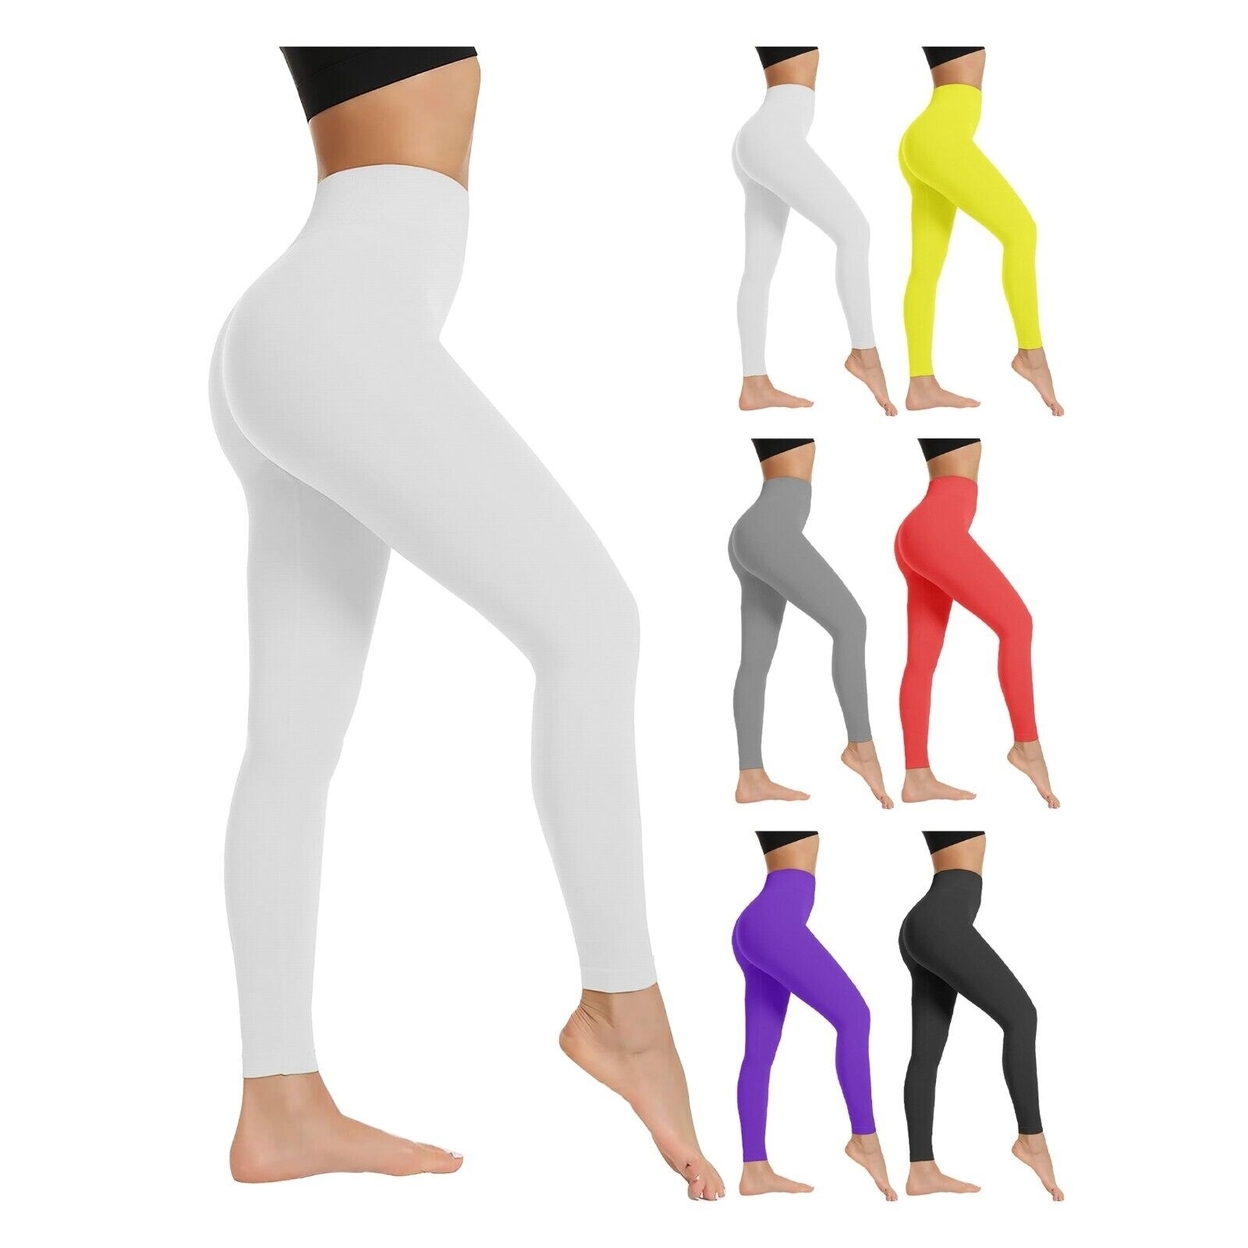 Women's High Waist Super-Soft Active Athlete Stretch Yoga Cozy Leggings - Red, X-large